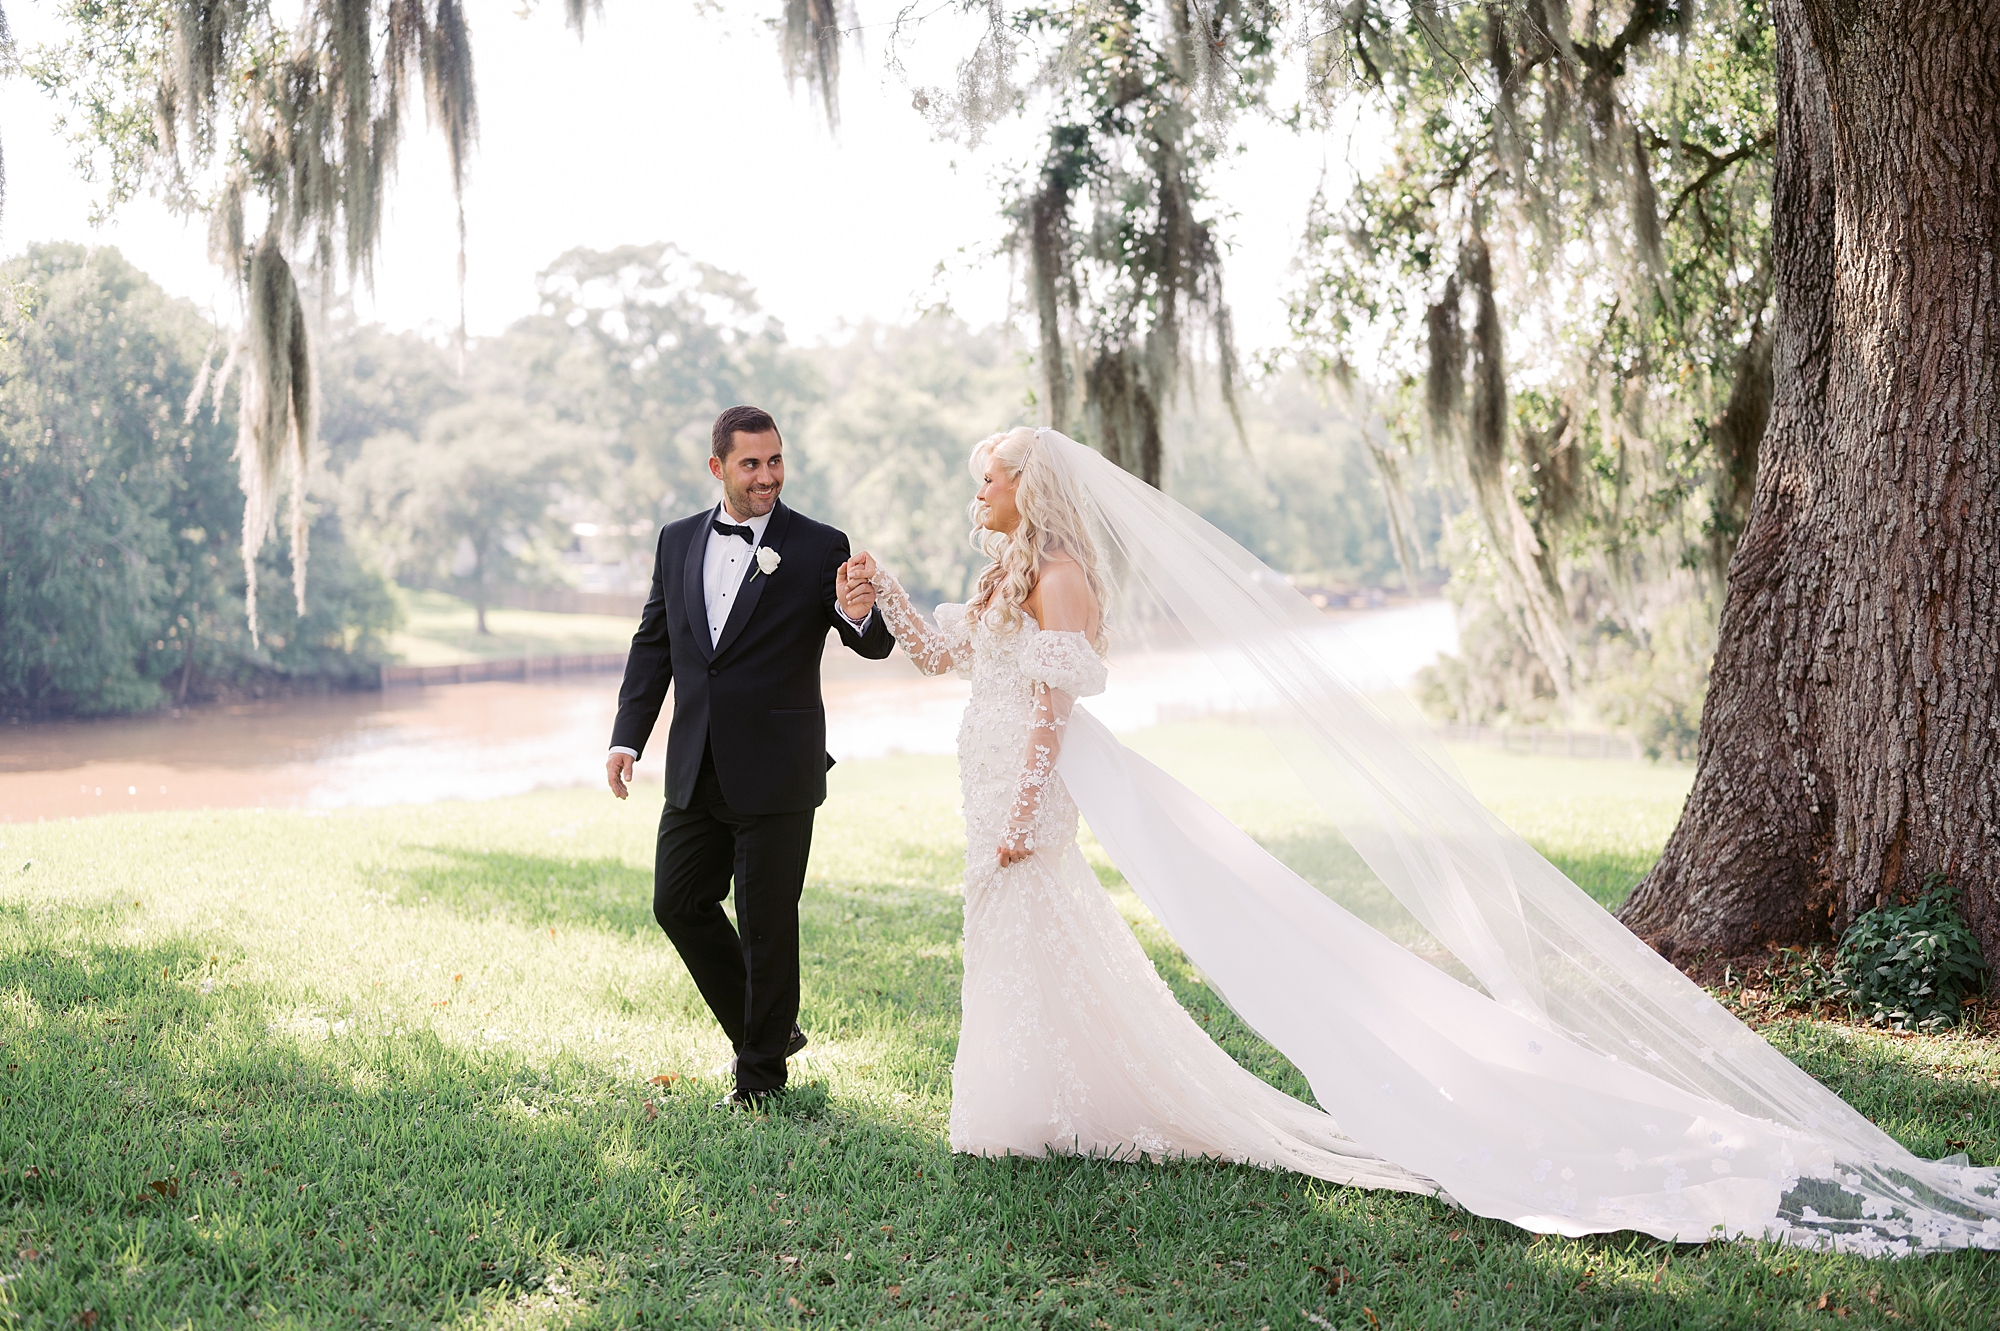 groom leads bride across lawn under tree with Spanish moss 